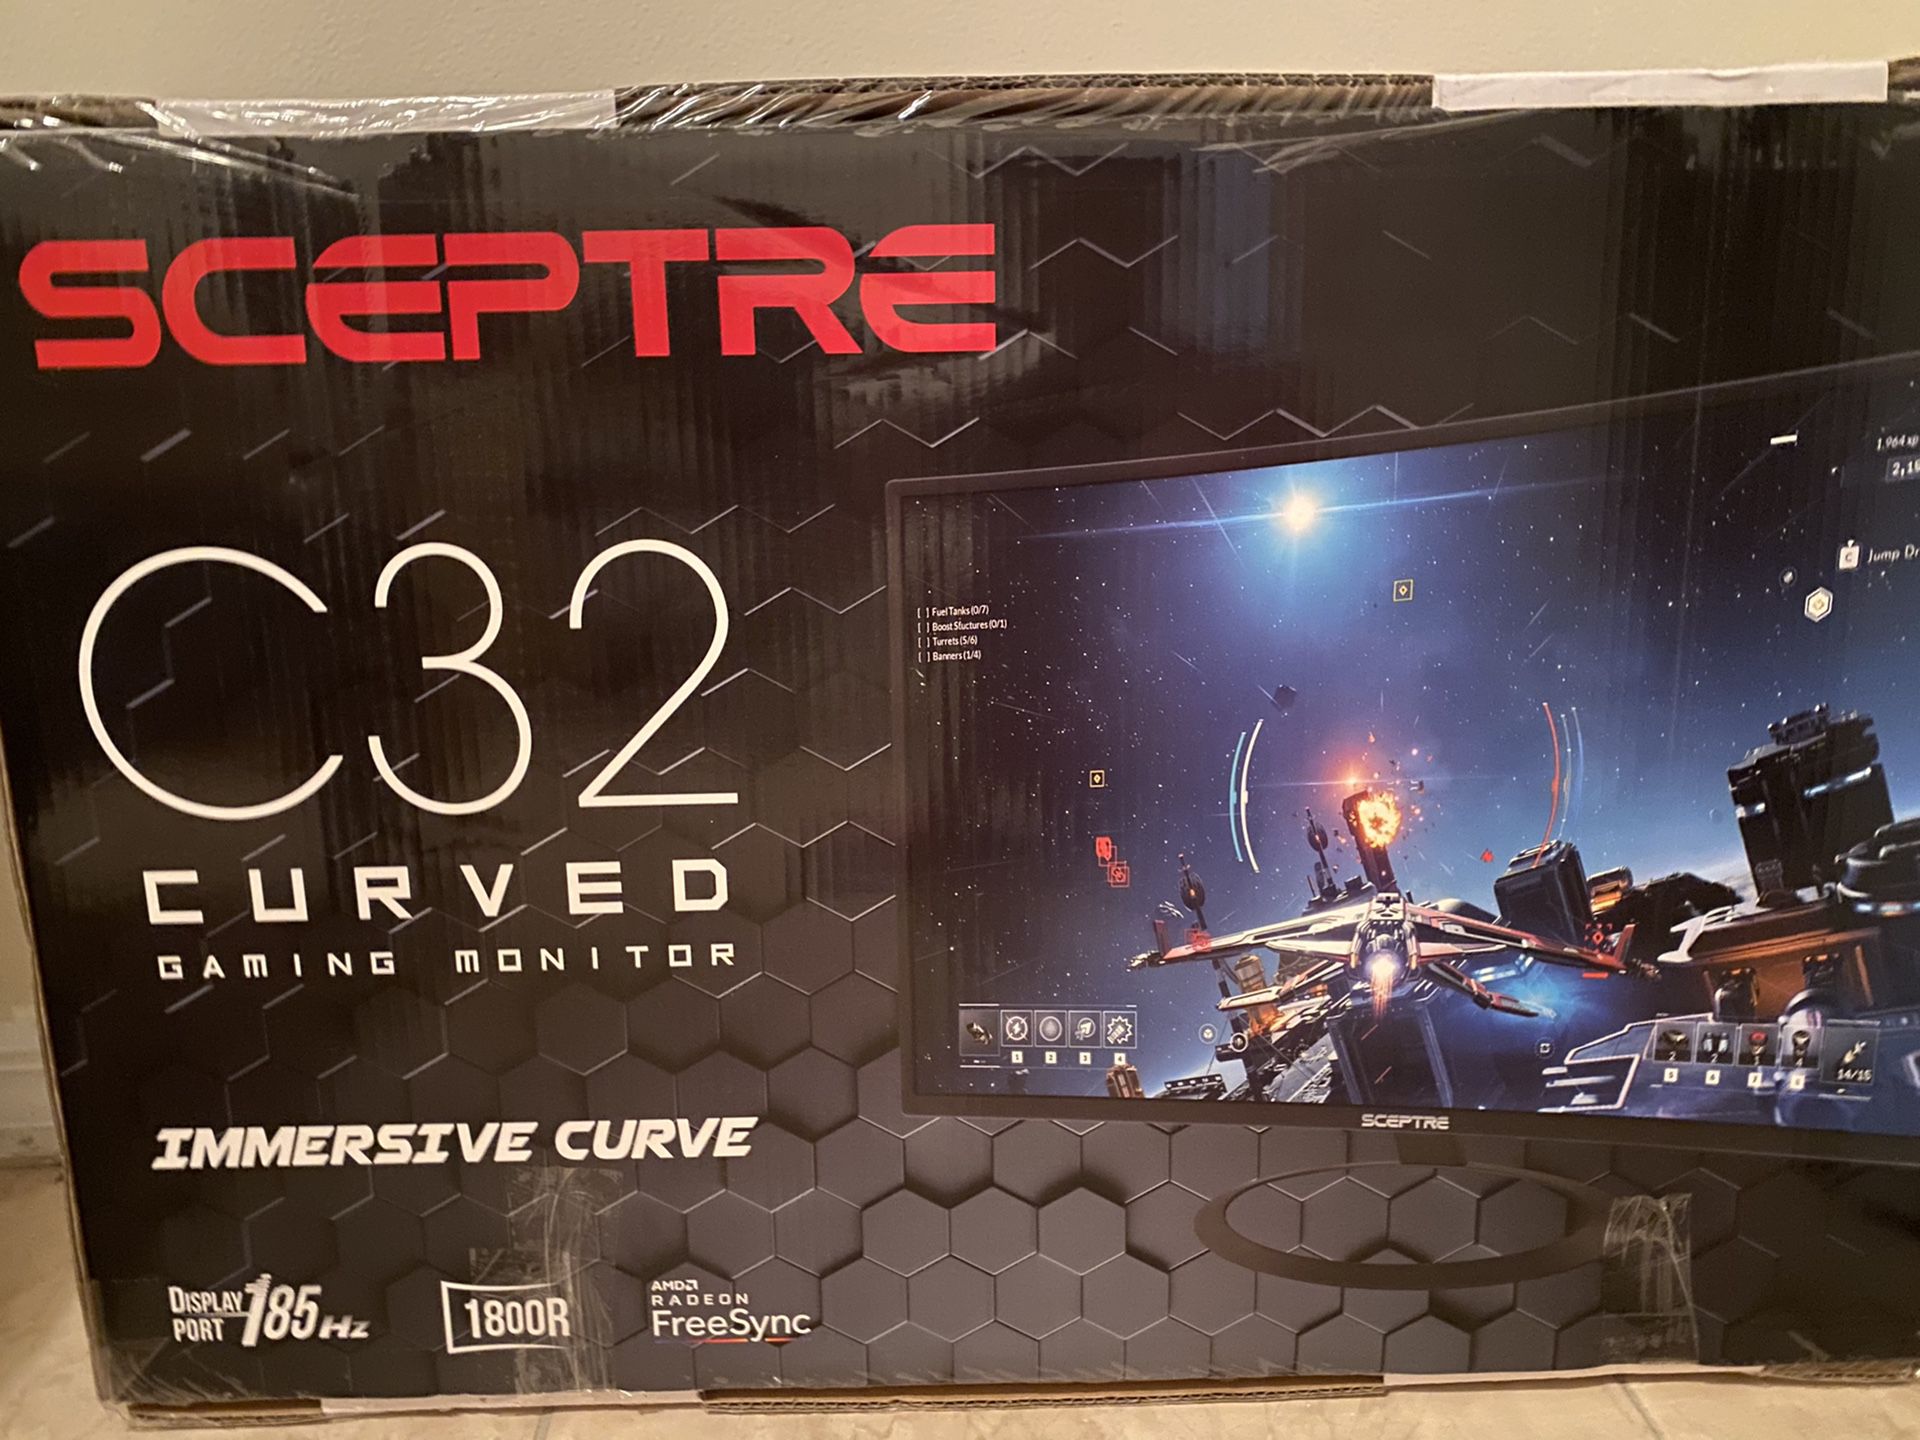 Sceptre curved gaming monitor 32inch up to 185Hz